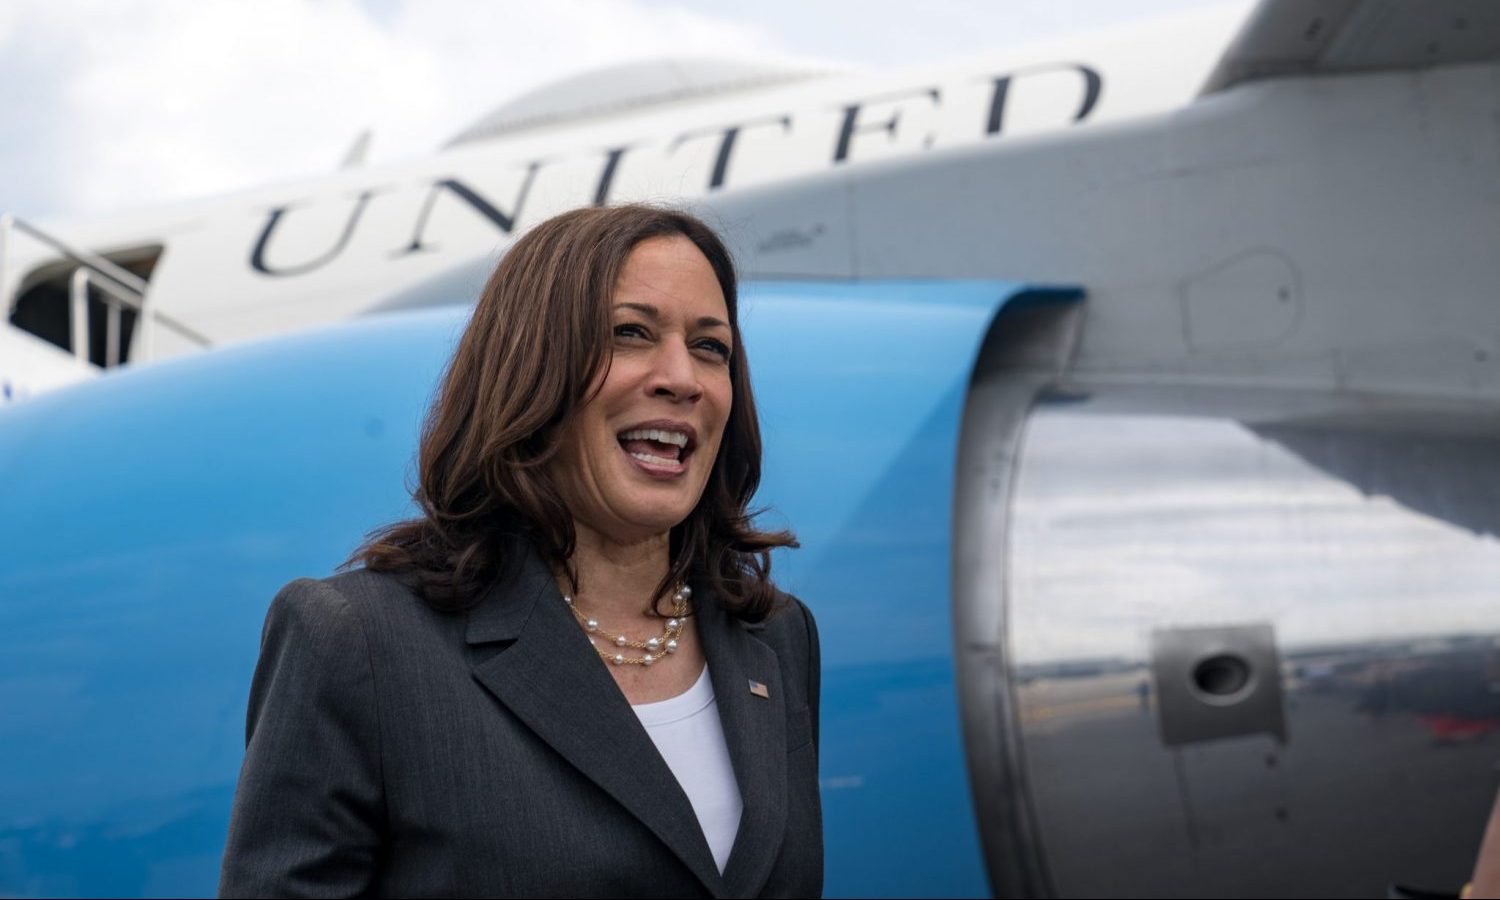 Why Was Vice President Harris Greeted With Trump Campaign Signs In Guatemala?